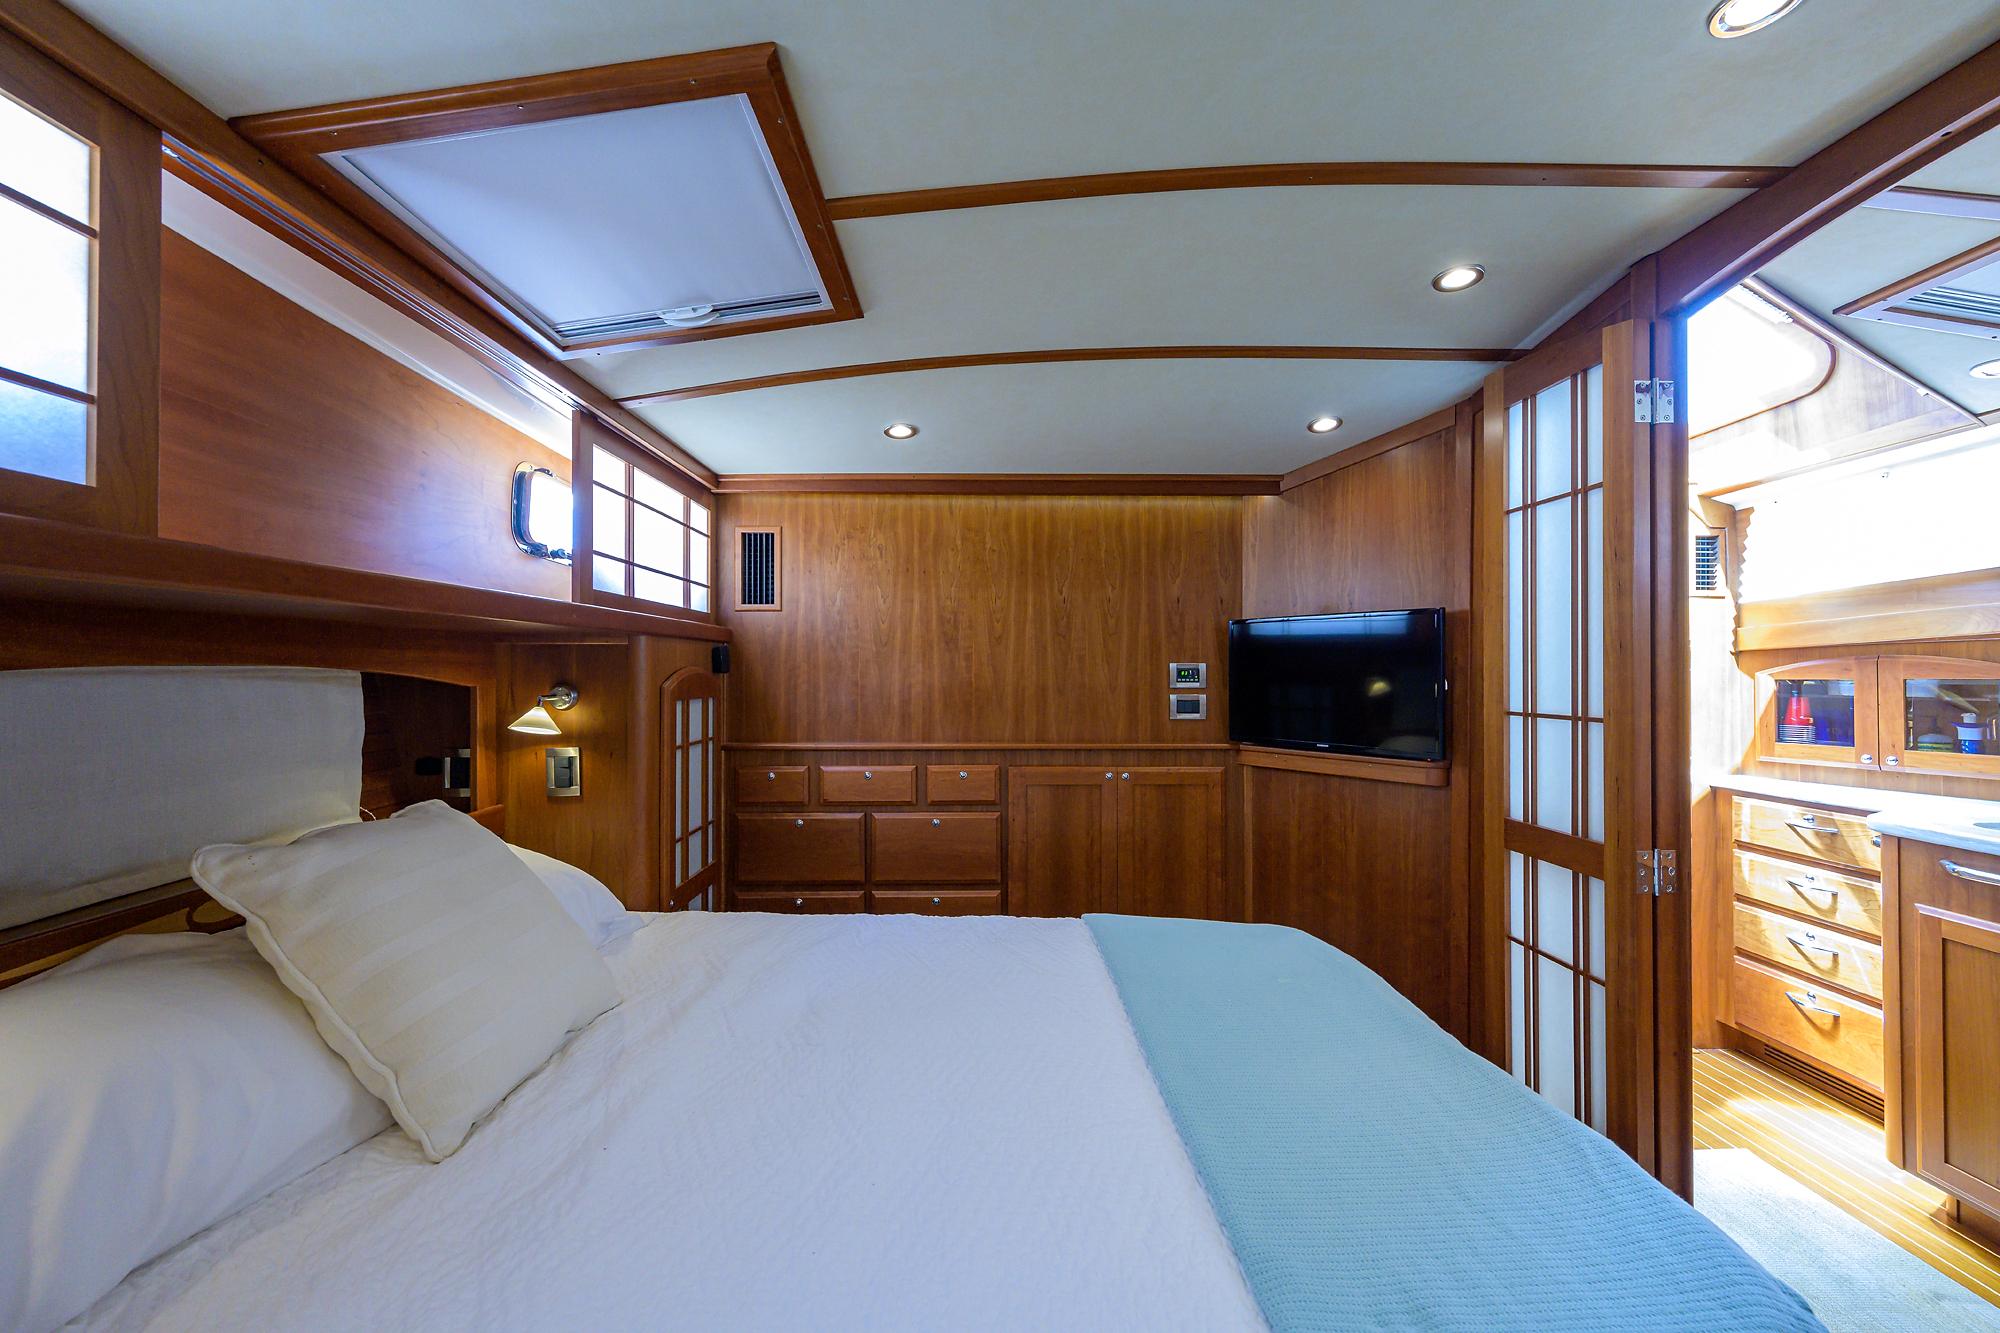 SABRE 48 ODIN - Master Berth & View Of Galley